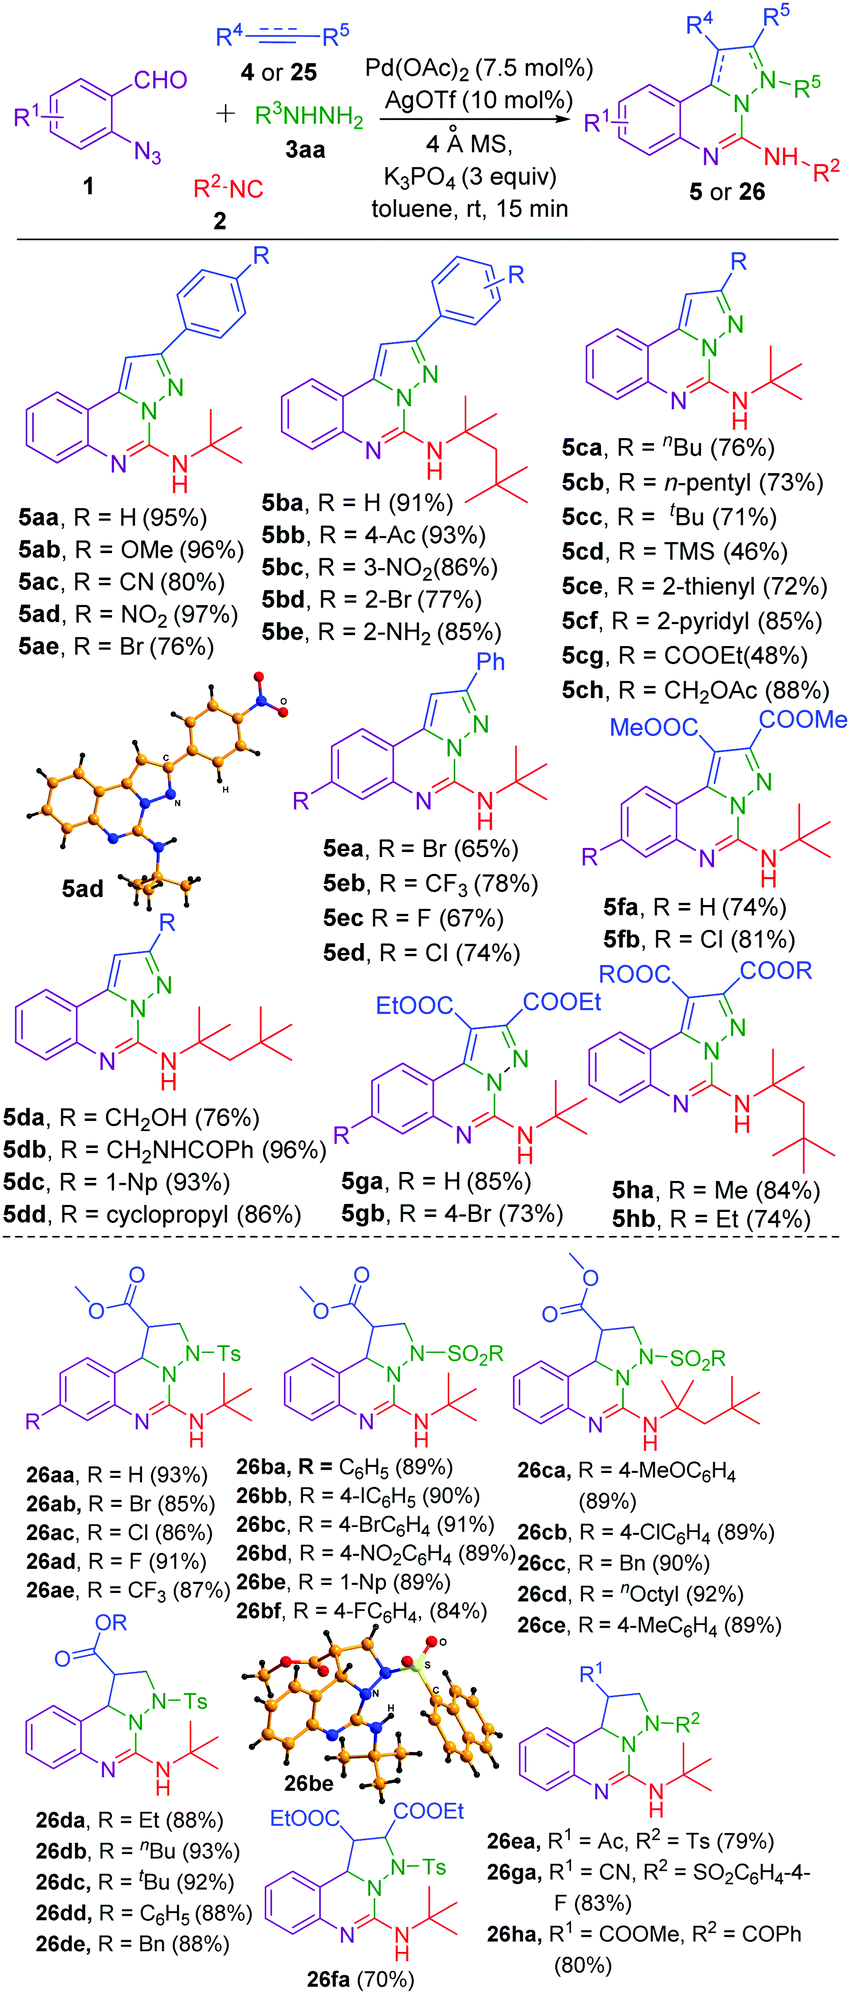 Relay Tricyclic Pd Ii Ag I Catalysis Design Of A Four Component Reaction Driven By Nitrene Transfer On Isocyanide Yields Inhibitors Of Egfr Chemical Communications Rsc Publishing Doi 10 1039 C8cch